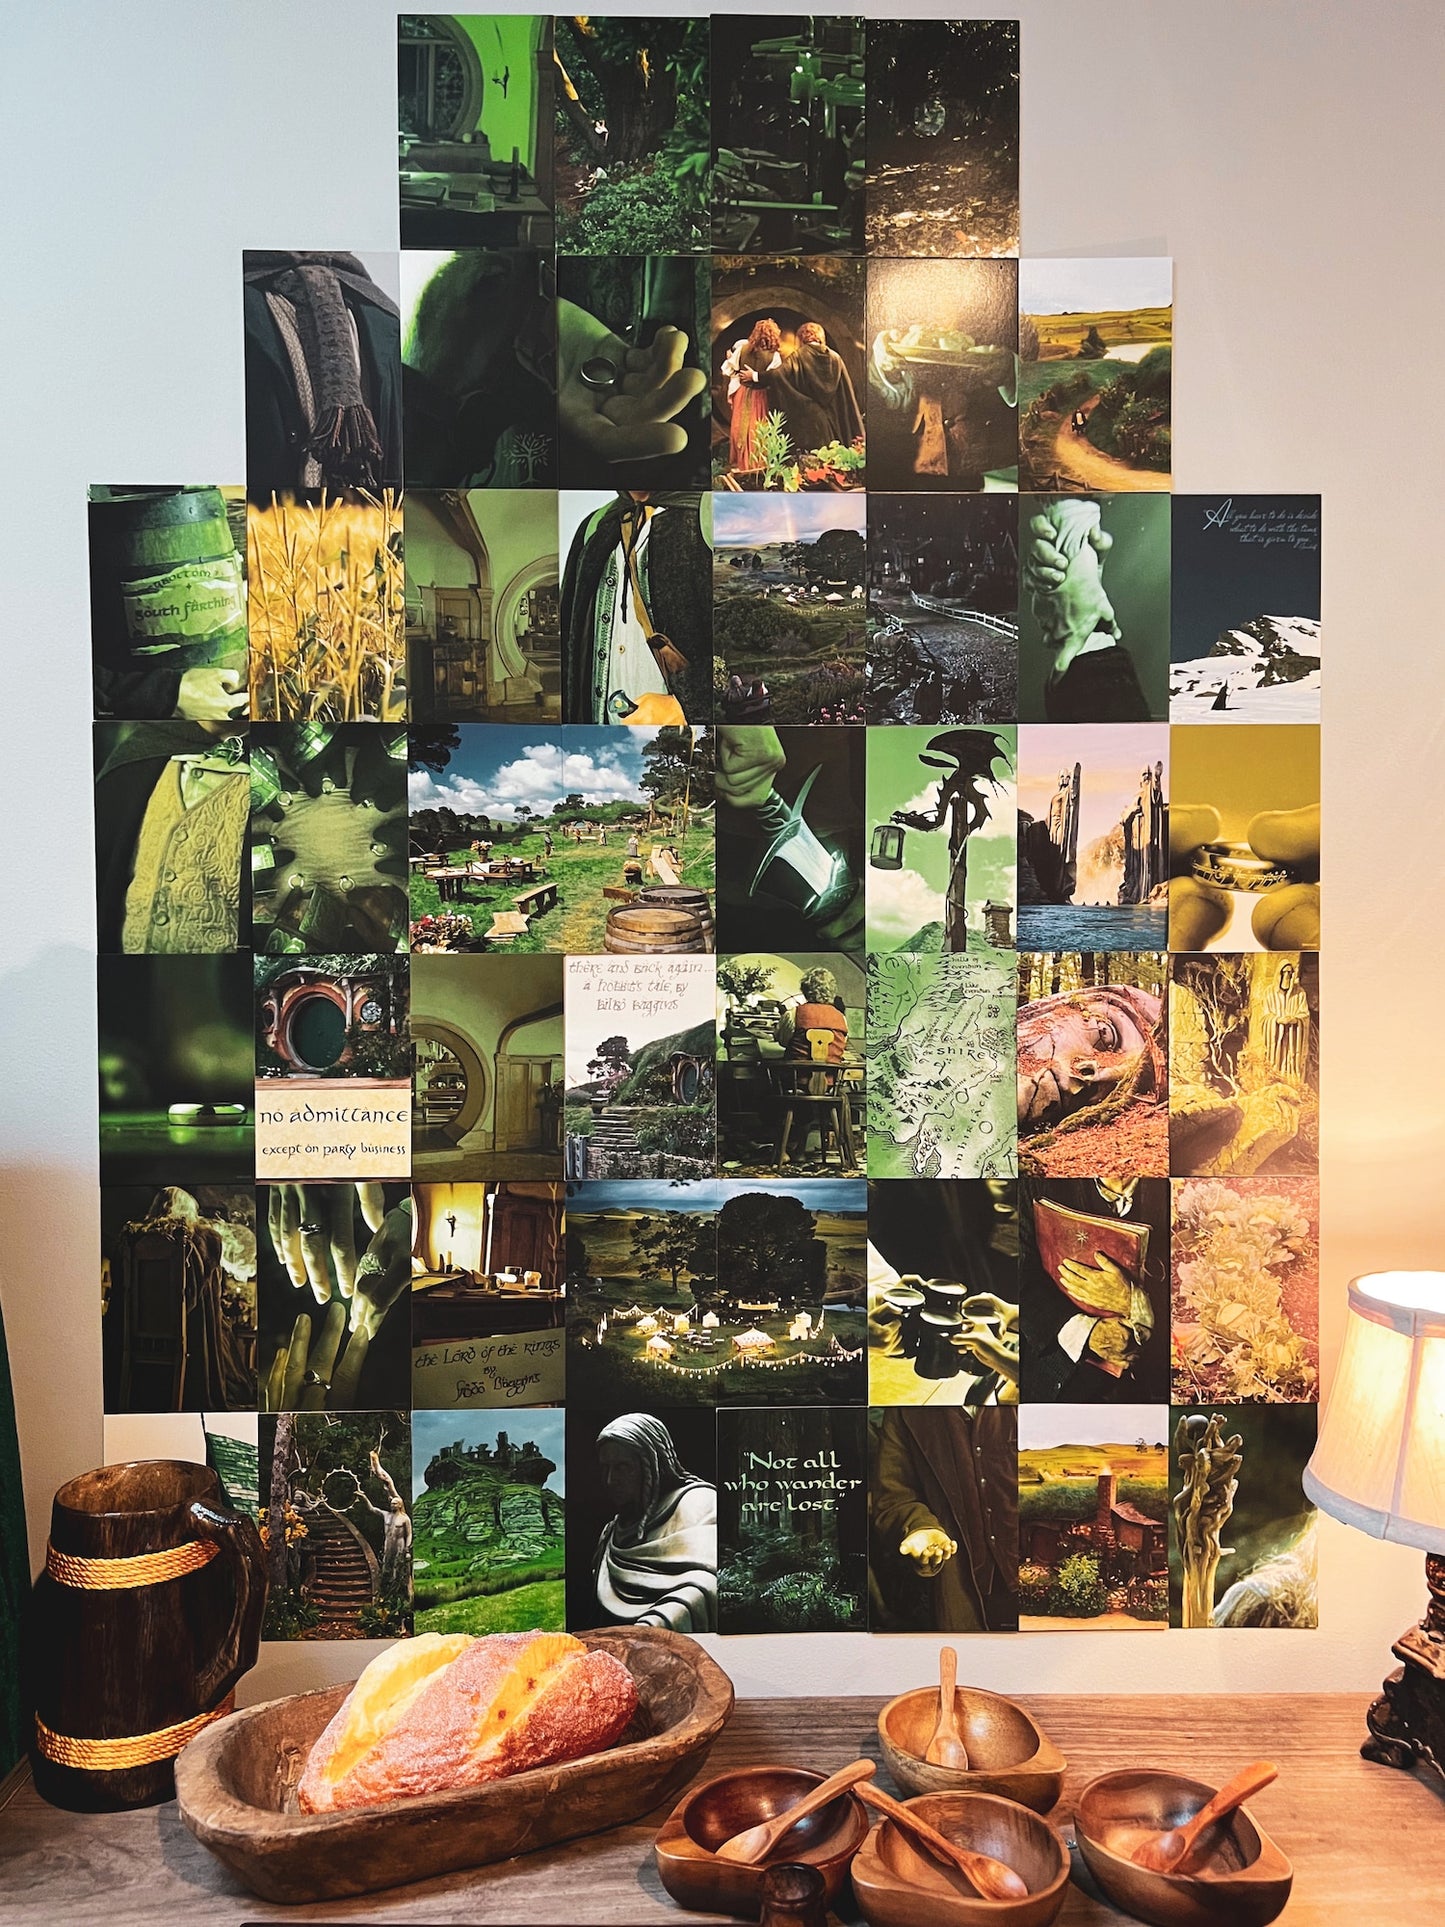 Lord of the Rings From the Shire Wall Collage Kit (4'' x 6'')